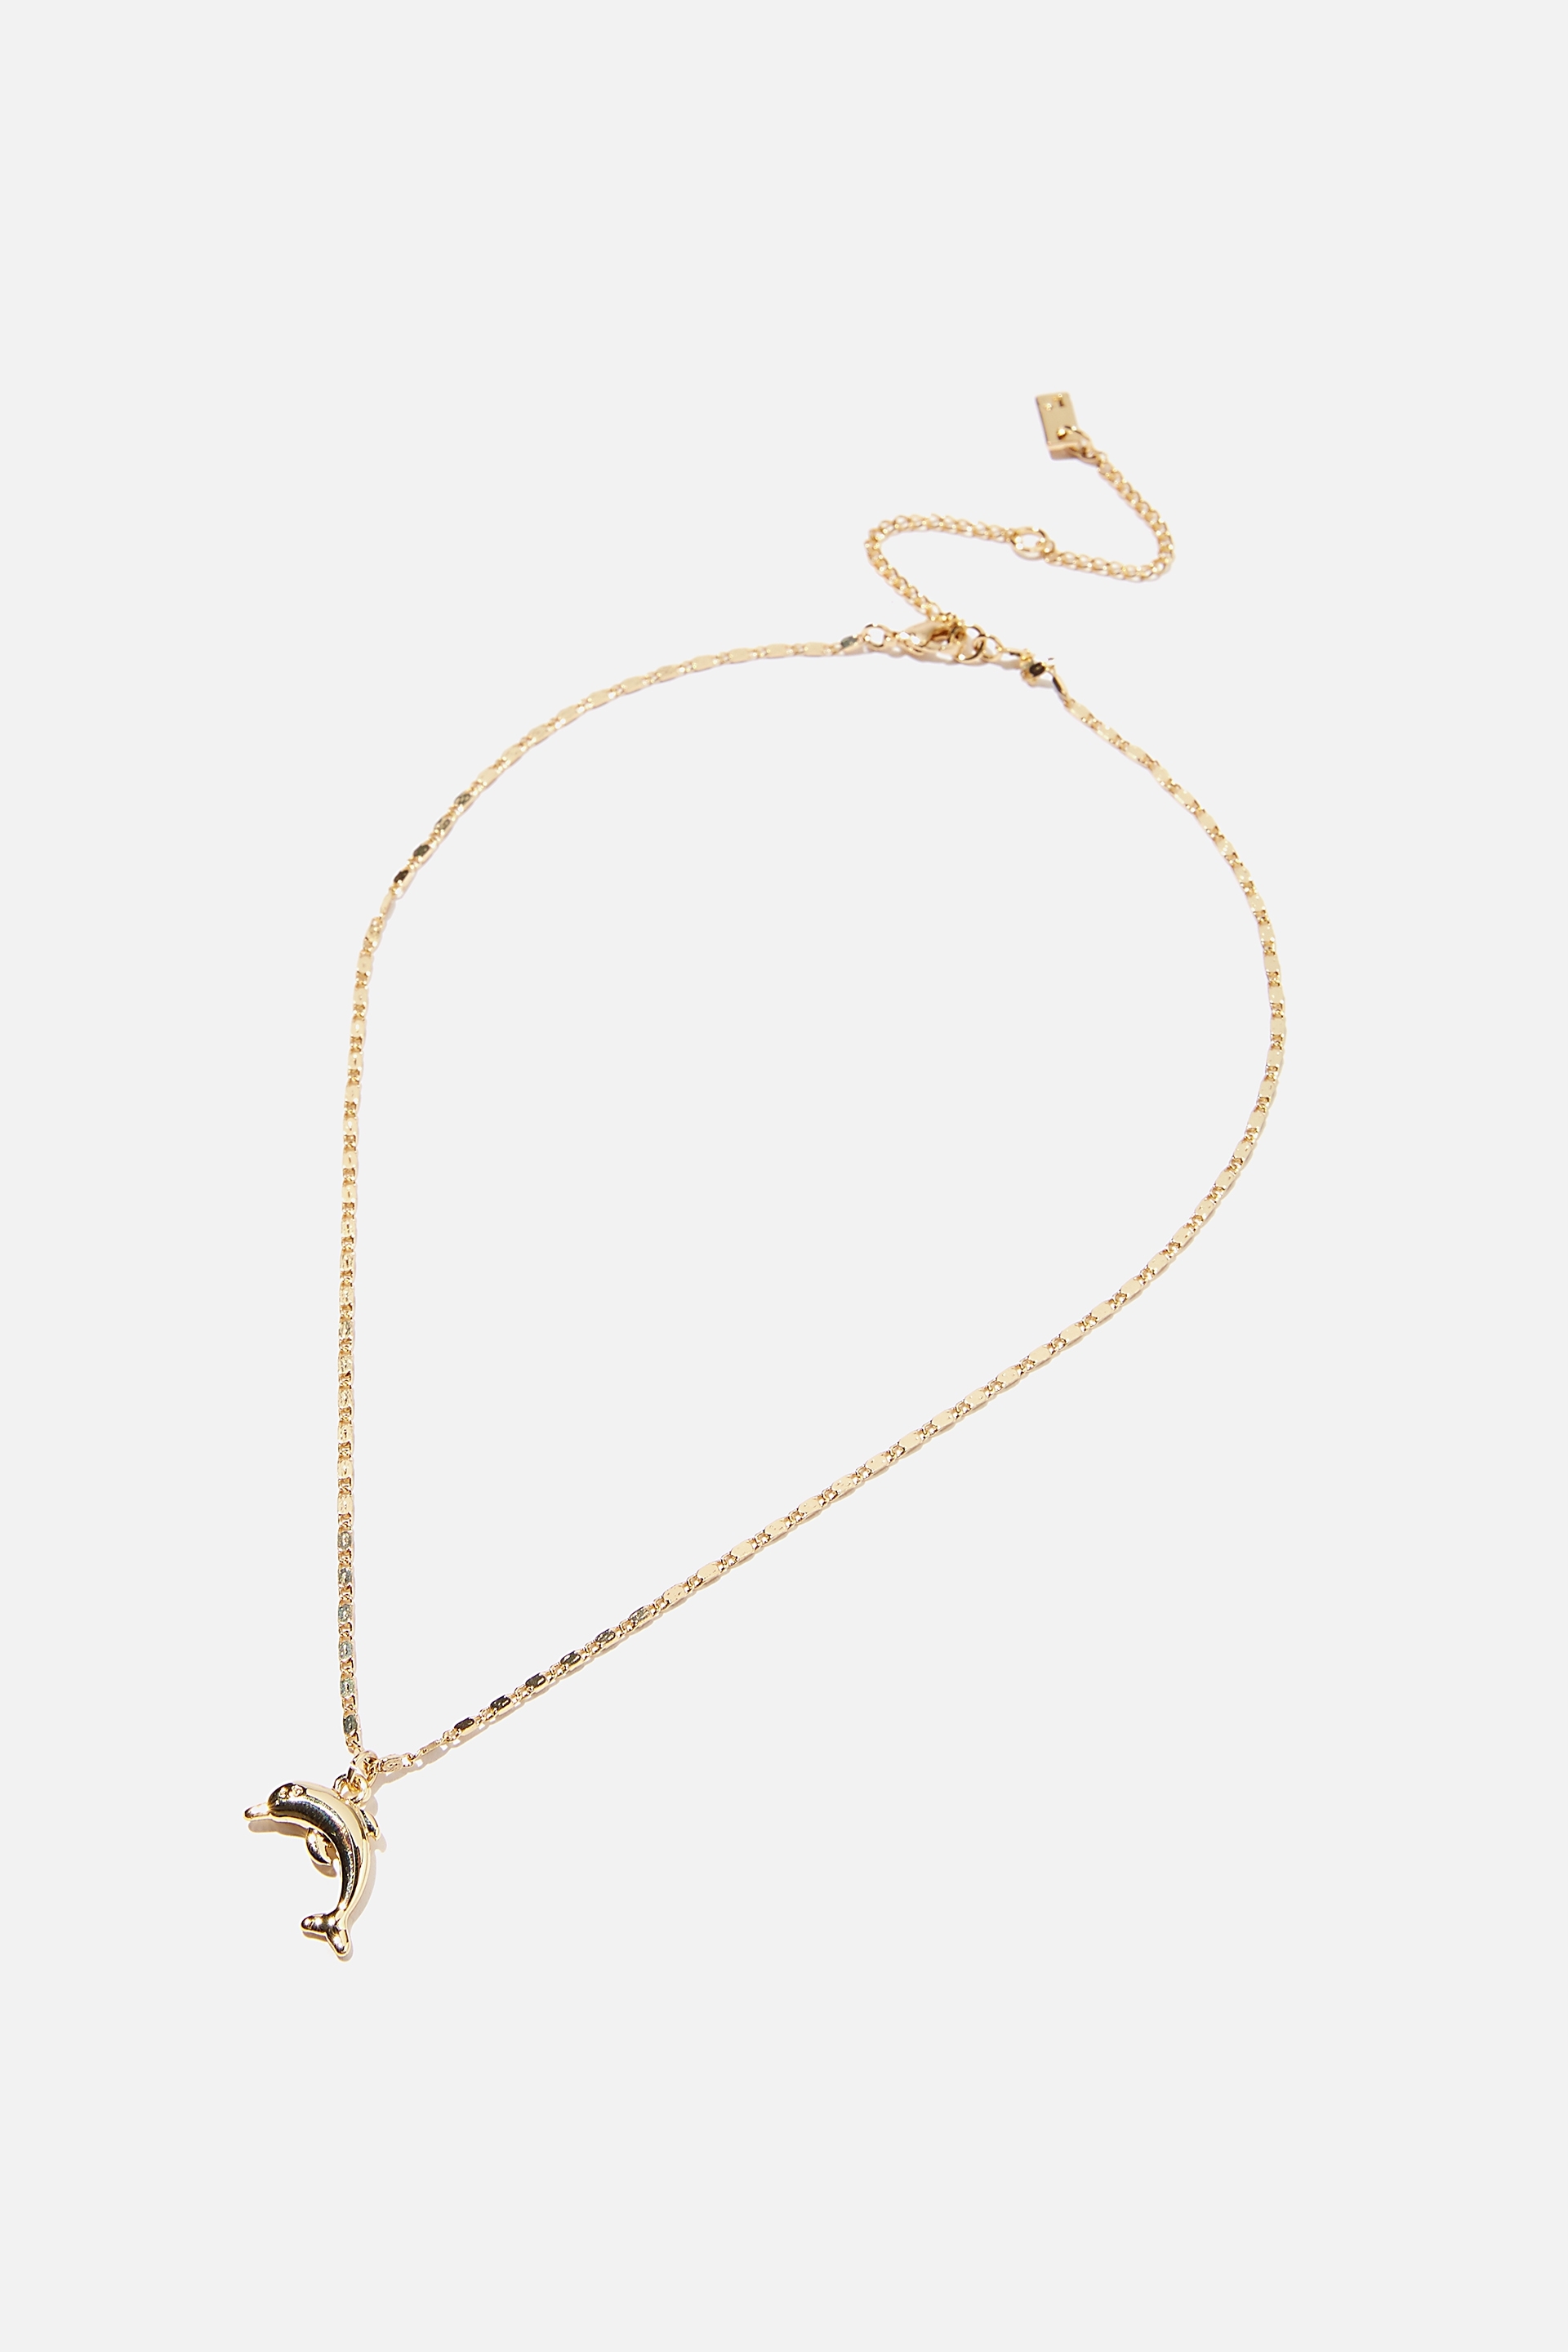 Rubi - Premium Pendant Necklace - Gold plated dolphin